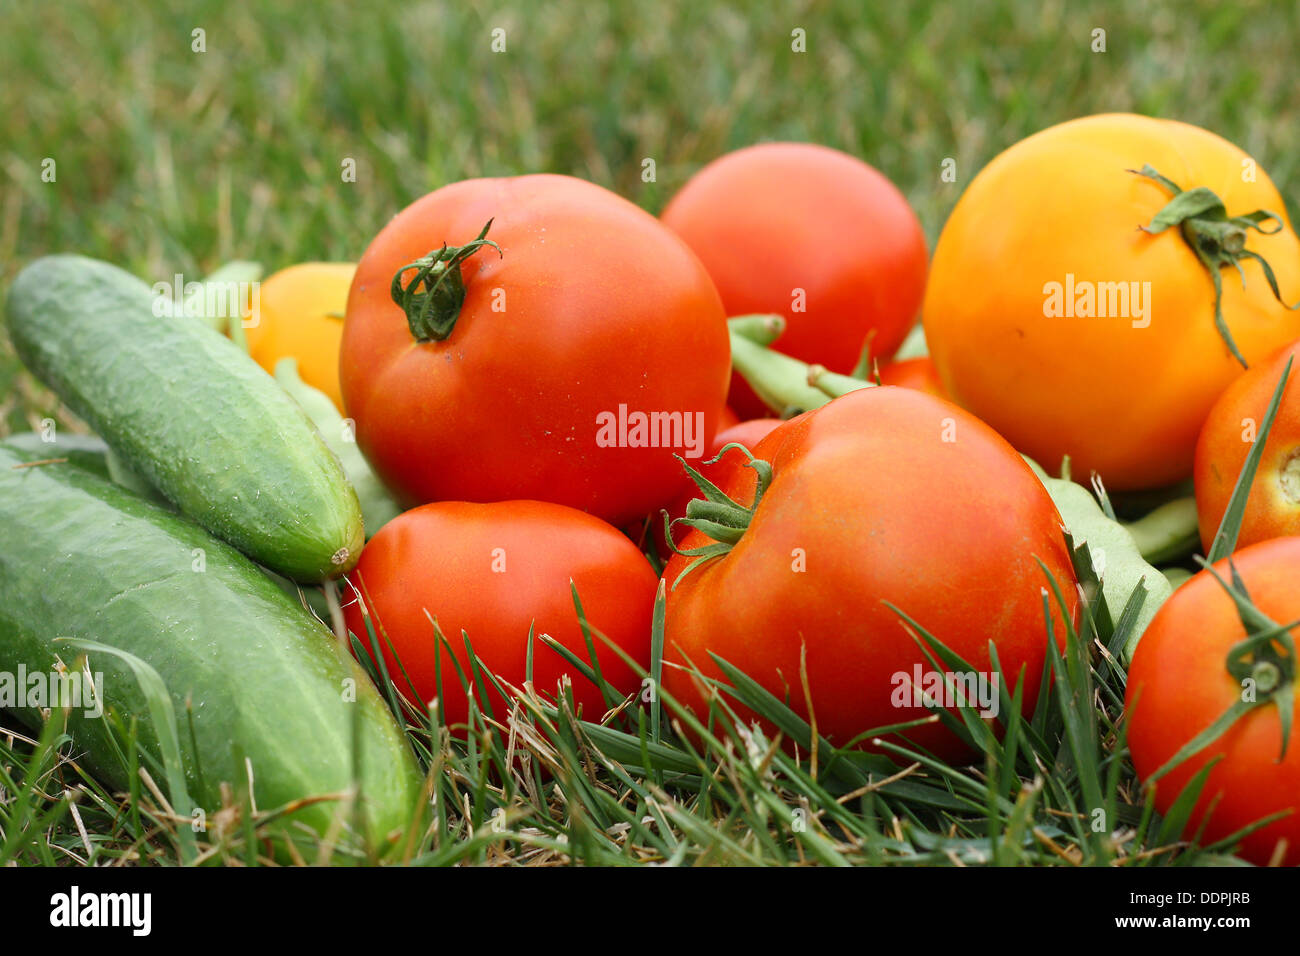 A pile of freshly picked vegetables;, tomatoes, cucumbers, and green beans, is laying outside in the green grass on a summer day Stock Photo